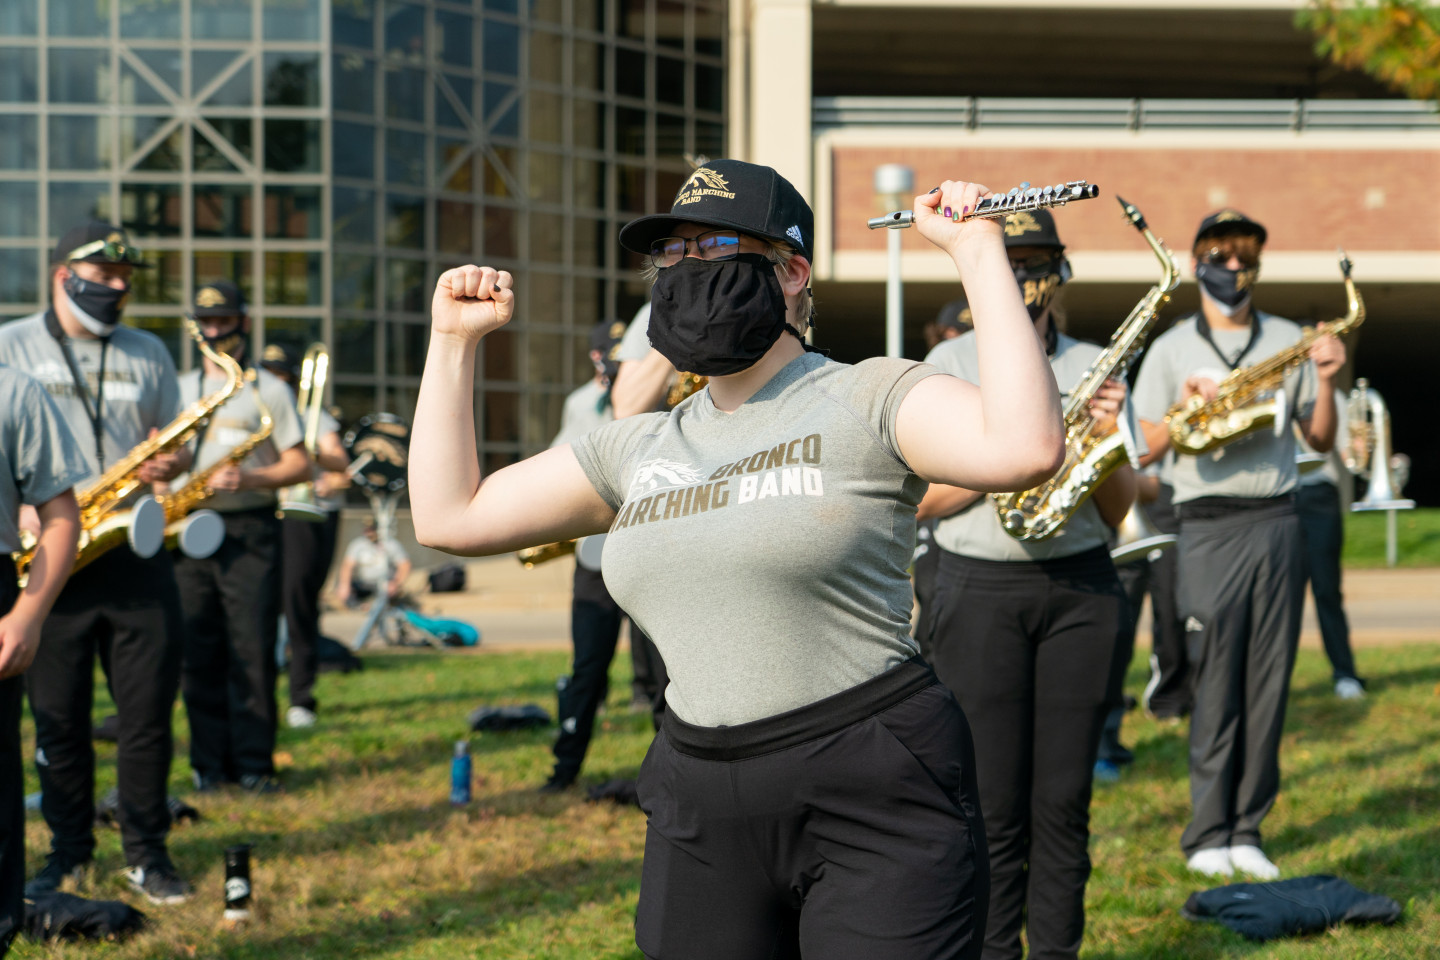 A member of the Bronco Marching Band flexes their muscles.